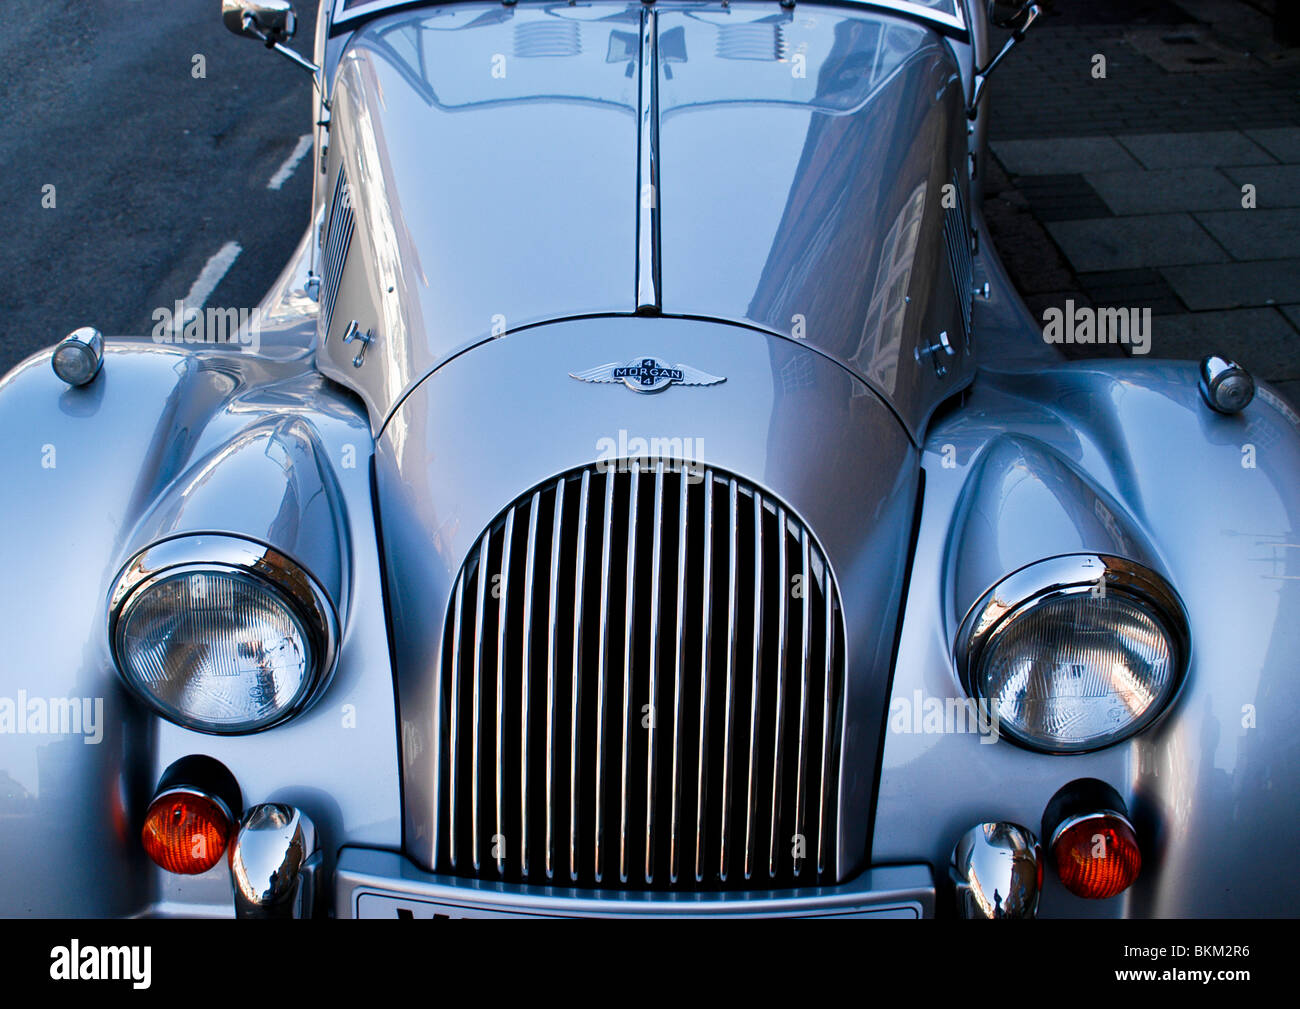 Martin silver metallic  vintage sports car view from front displaying exquisite lights, classical shape, and thrilling style. Stock Photo